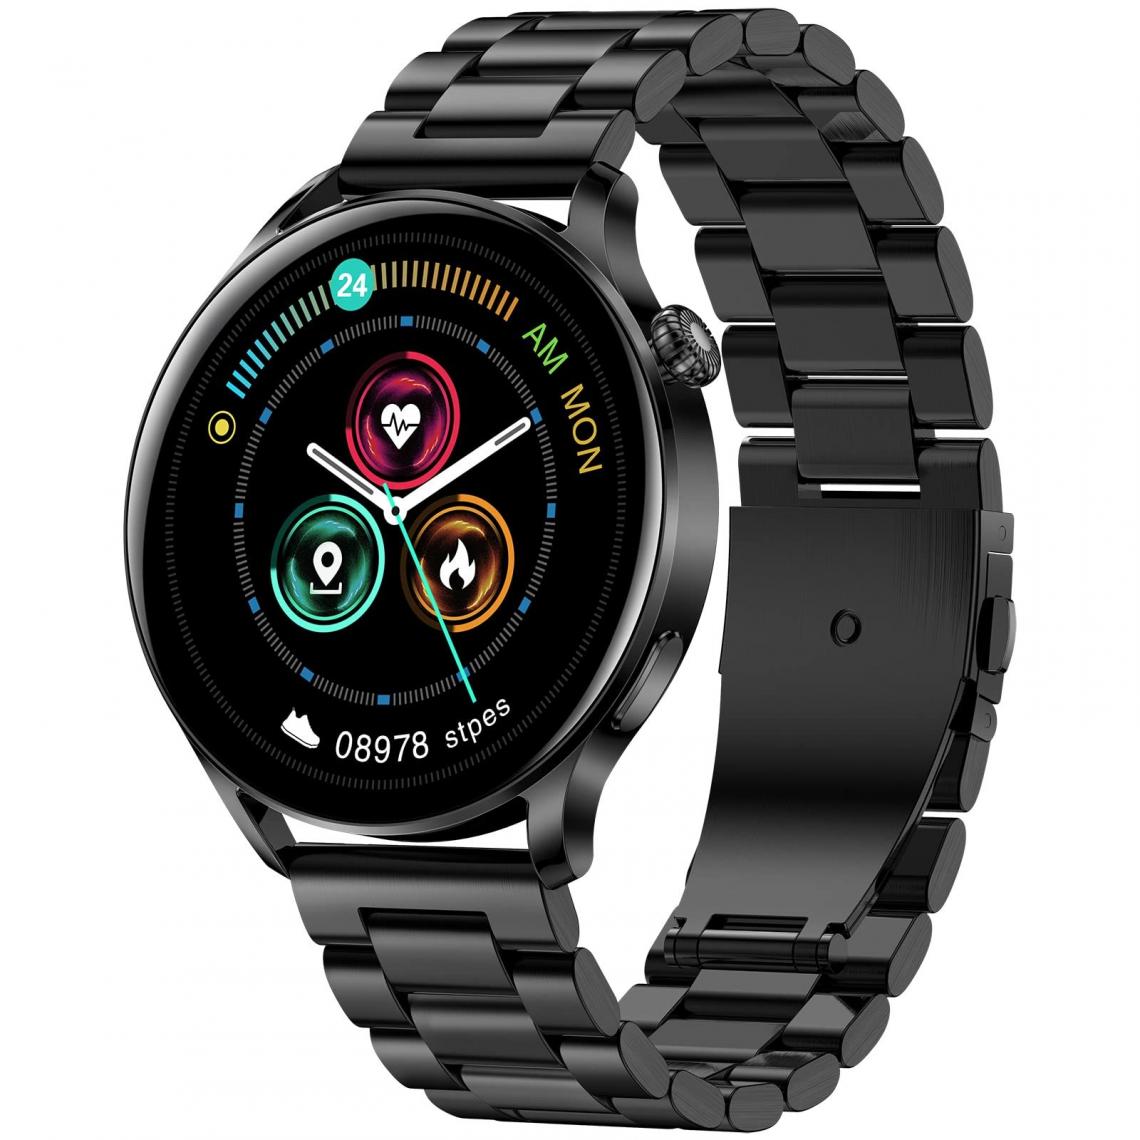 Chronotech Montres - Chronus Smart Watch for Men Women Make And Receive Bluetooth Calls Activity Fitness Tracker Music Player Business Smartwatch Pedometer Calories IP67 Waterproof for Android Ios Phones(black) - Montre connectée